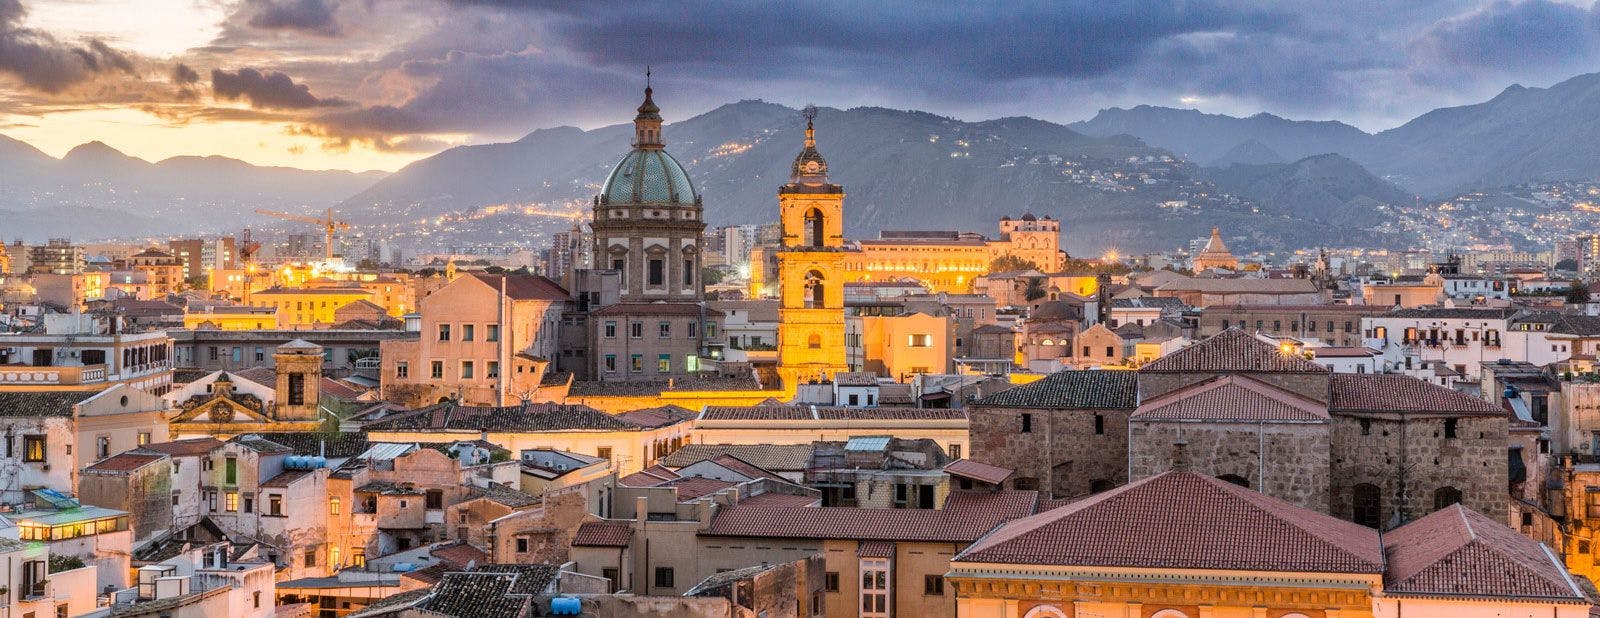 Palermo city skyline in Sicily with mountains in the background